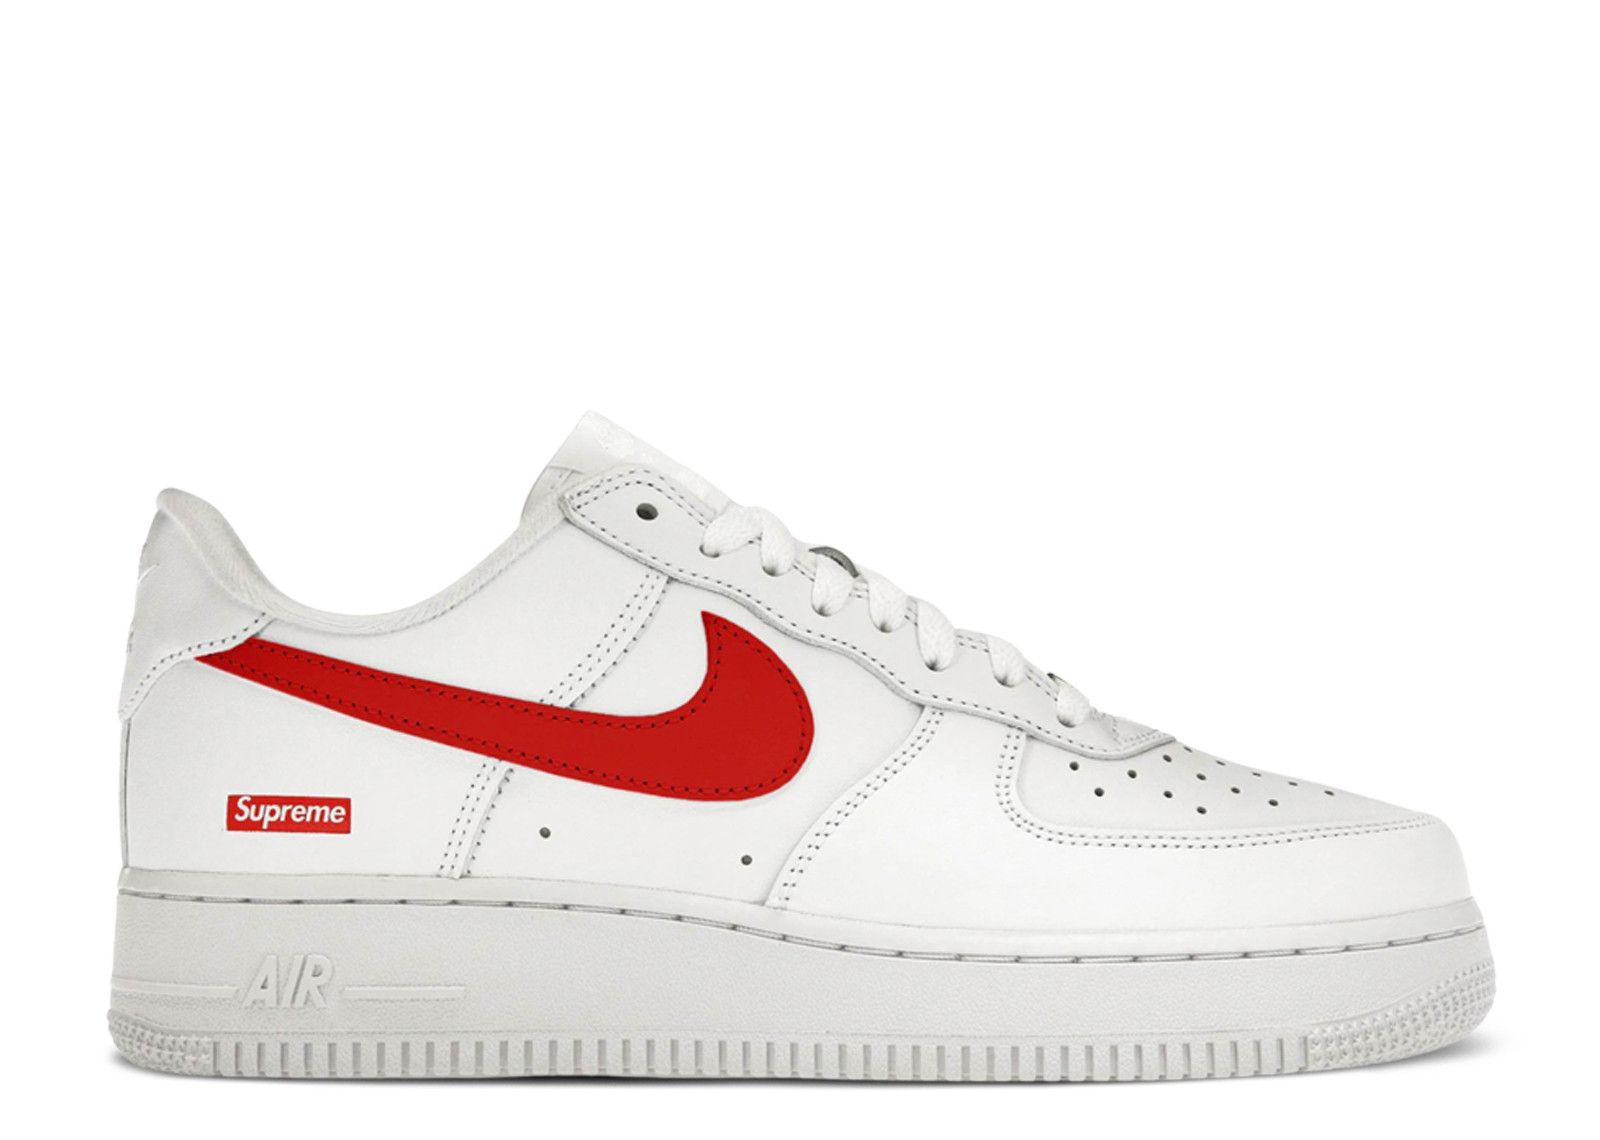 Supreme x Air Force 1 Low 'Box Logo - Speed Red' Shanghai Exclusive